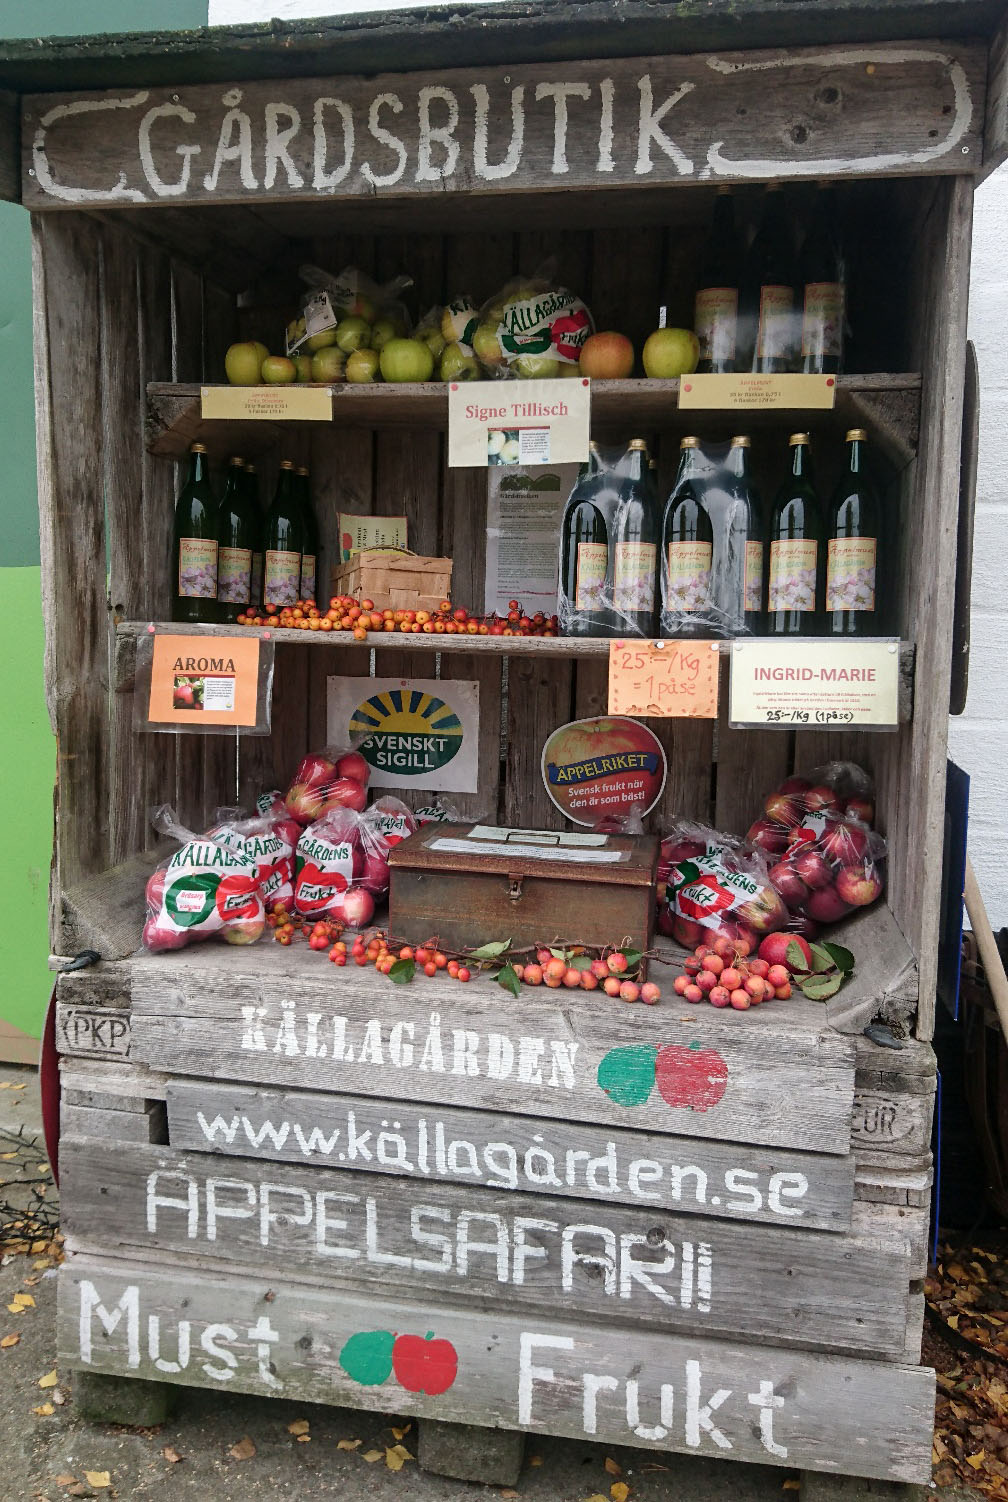 At our farm stand fpr self-service you can buy our apple juice and apples in season.